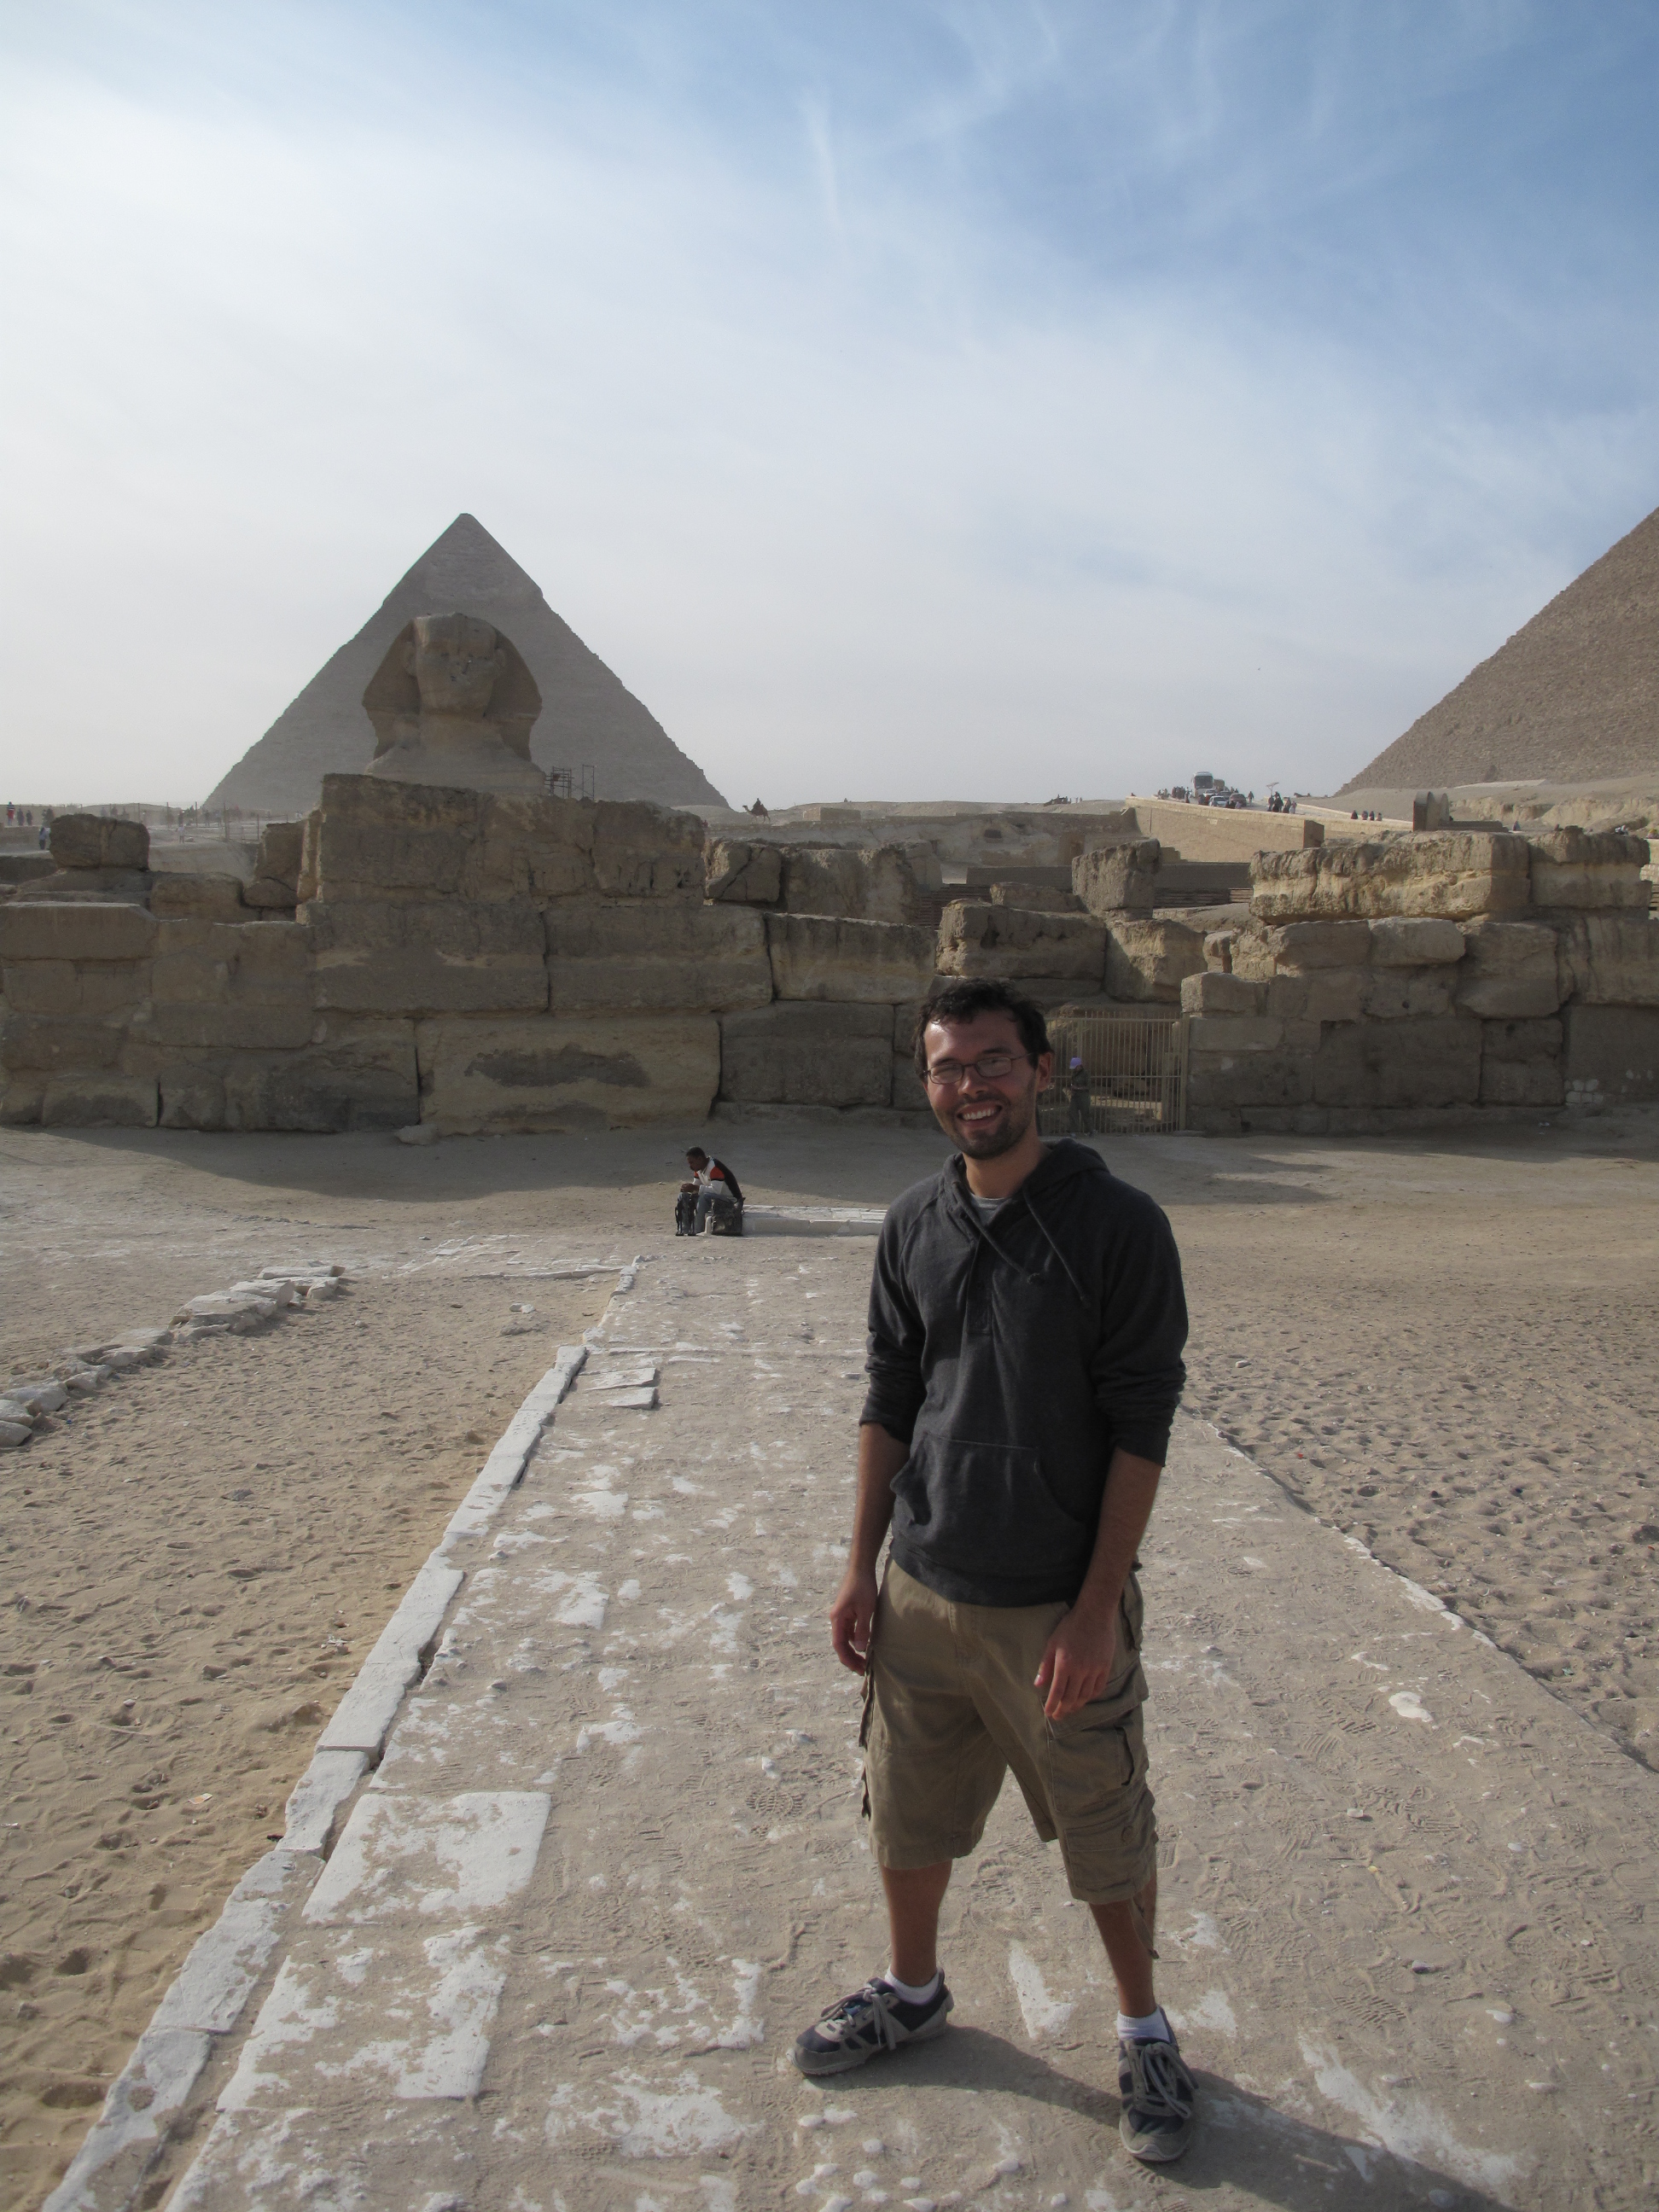 This is a picture of me in Egypt again.